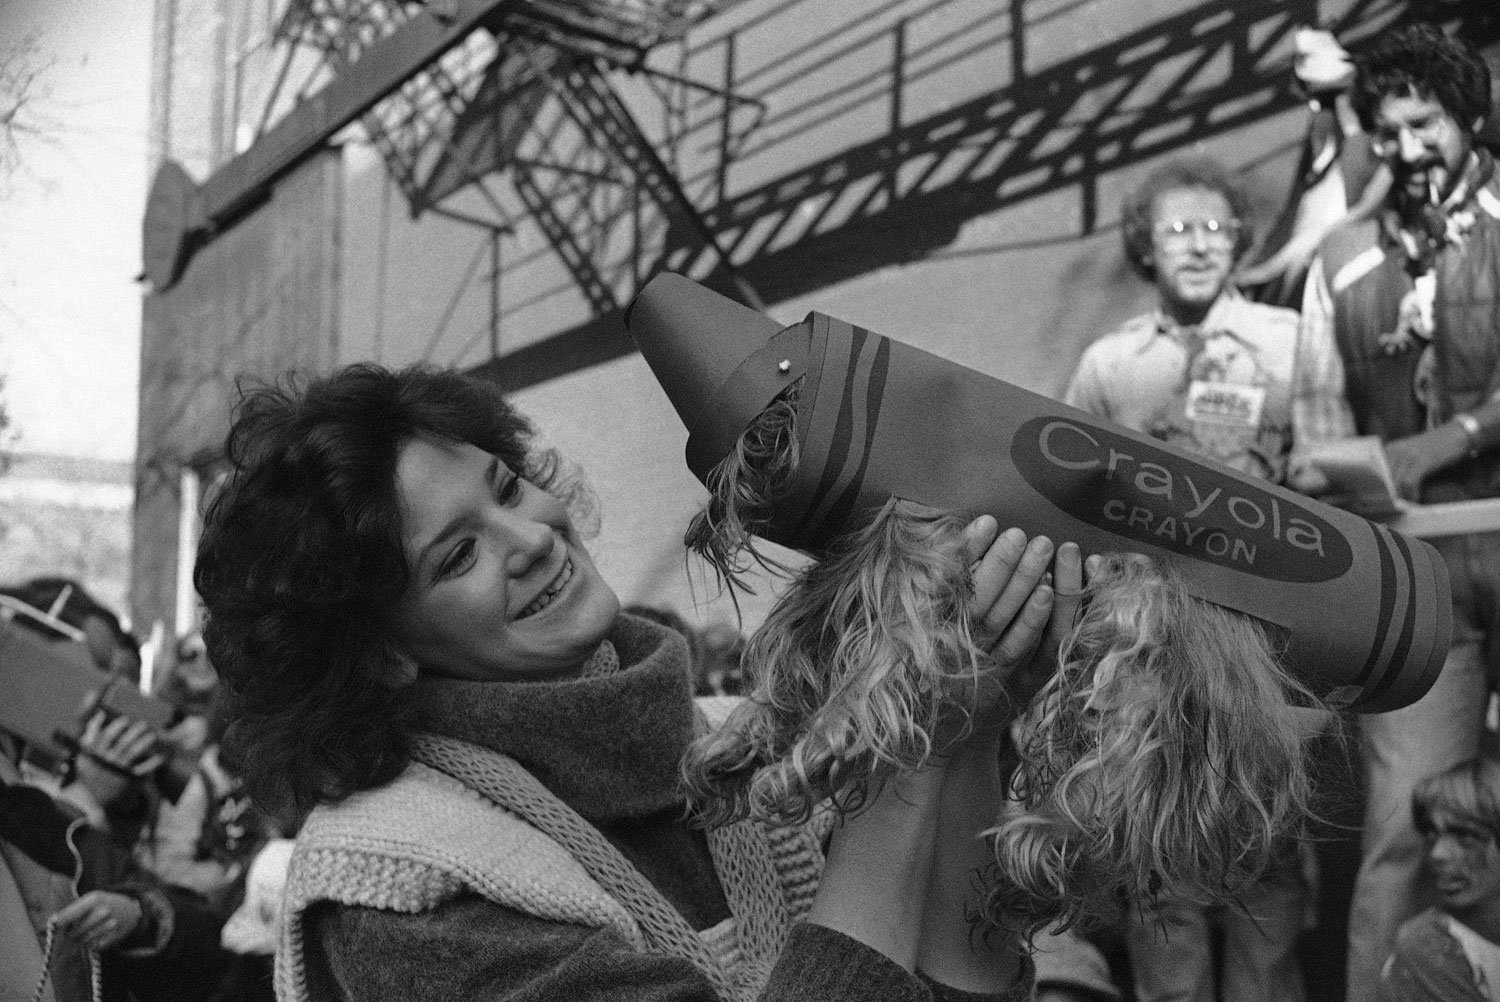  Anita Rosenblum holds her dog, Samson, who, dressed as a crayon, was among the finalists at a Halloween costume contest for pets held at a Chicago pet store on Oct. 29, 1978. The shaggy crayon won the “Creative Playthings Award.” (AP Photo/Fred Jewe